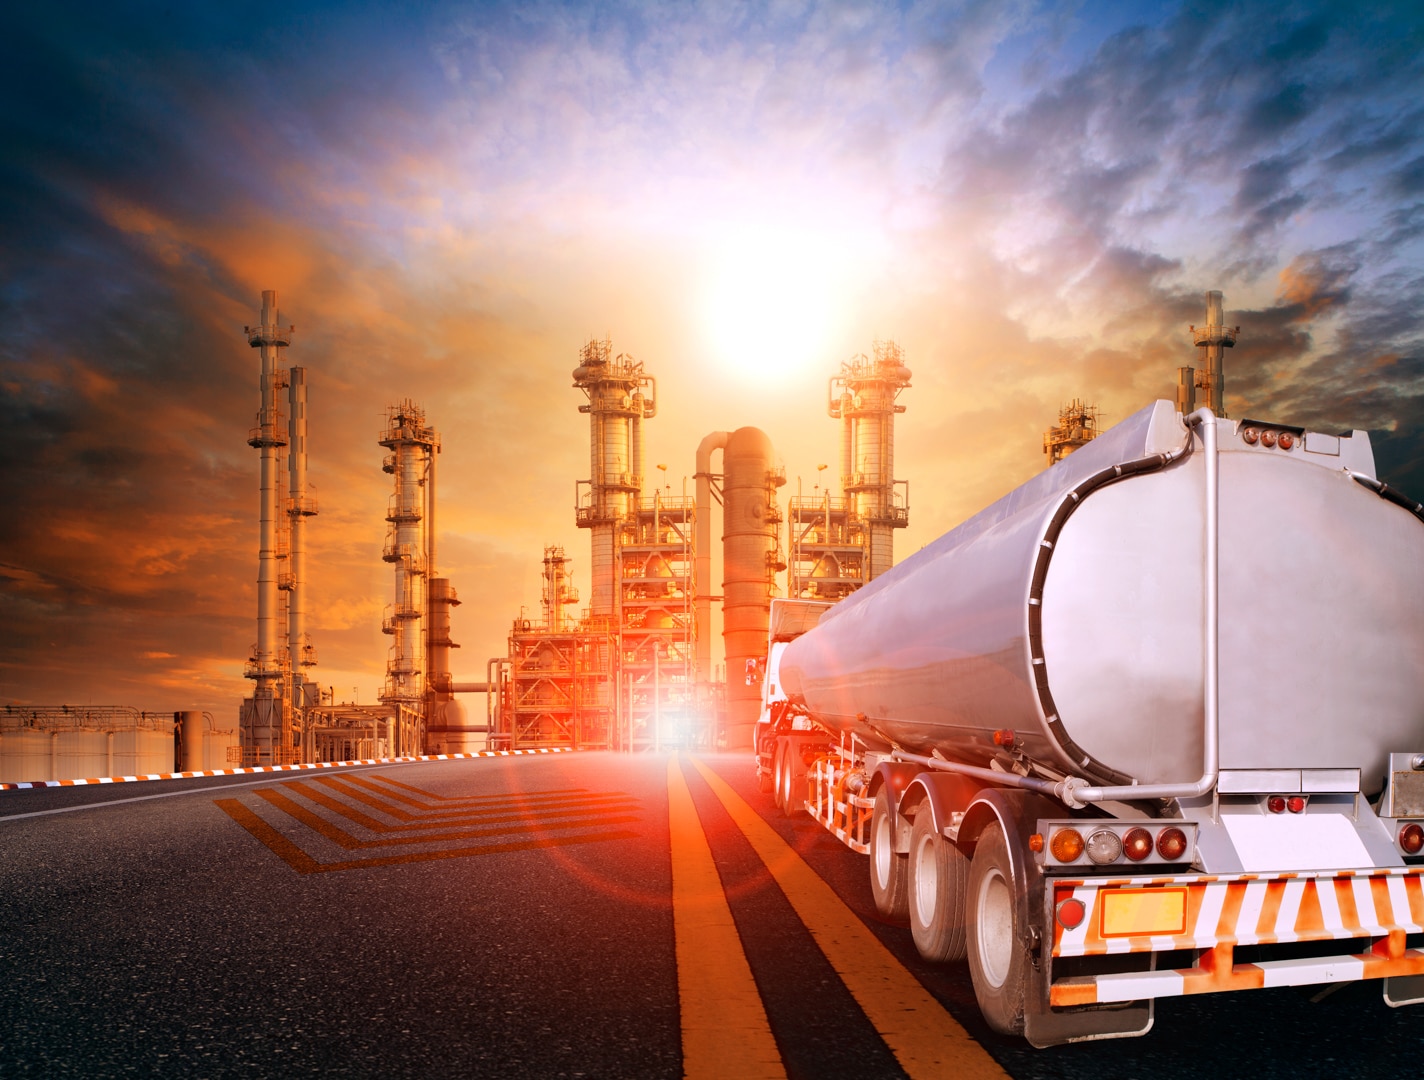 oil container truck and heavy petrochemical industries plant for petroleum fuel industrial theme